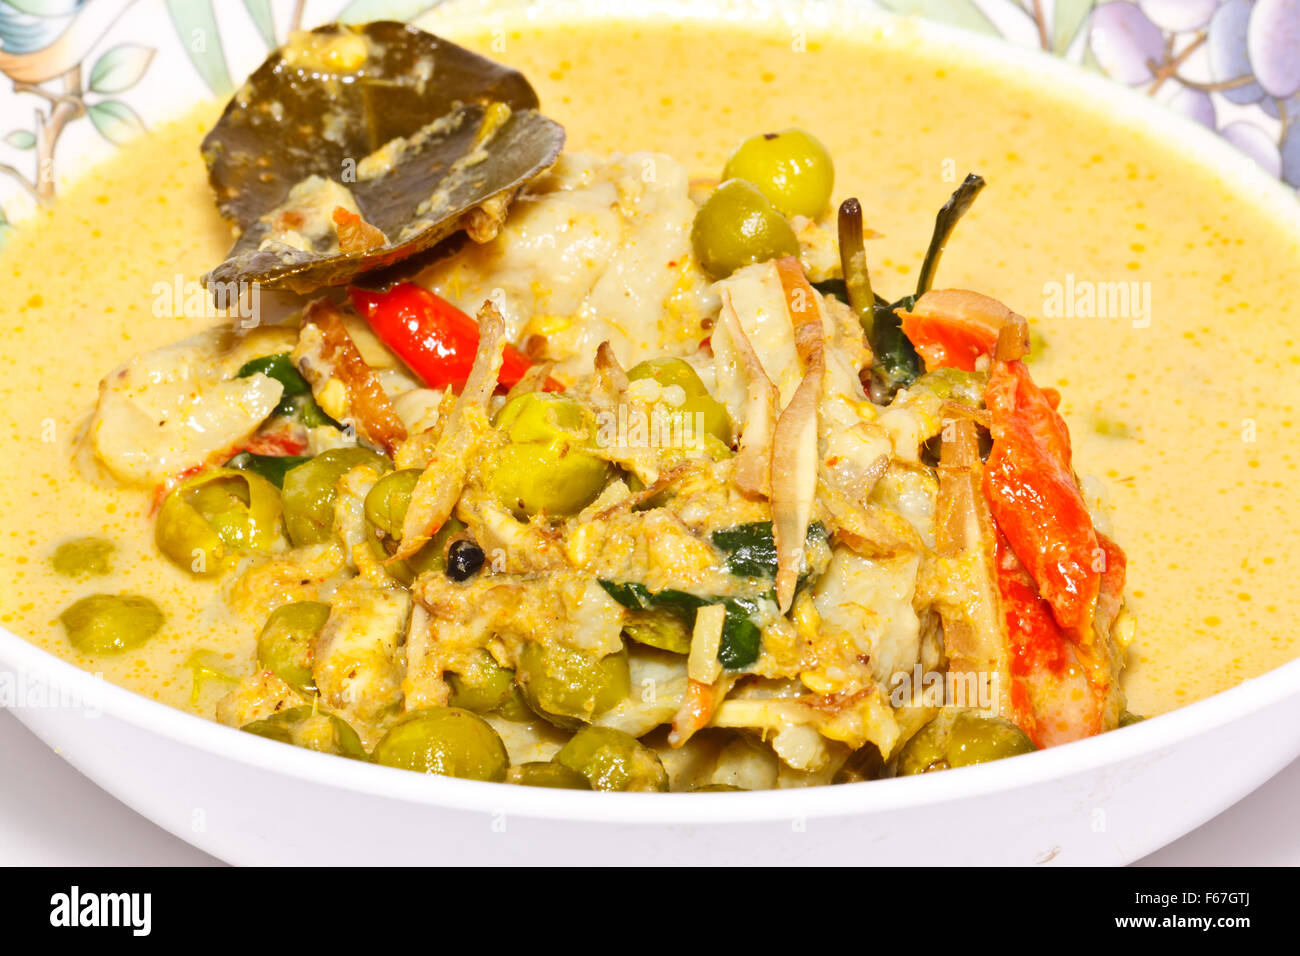 delicious food in thailand Stock Photo